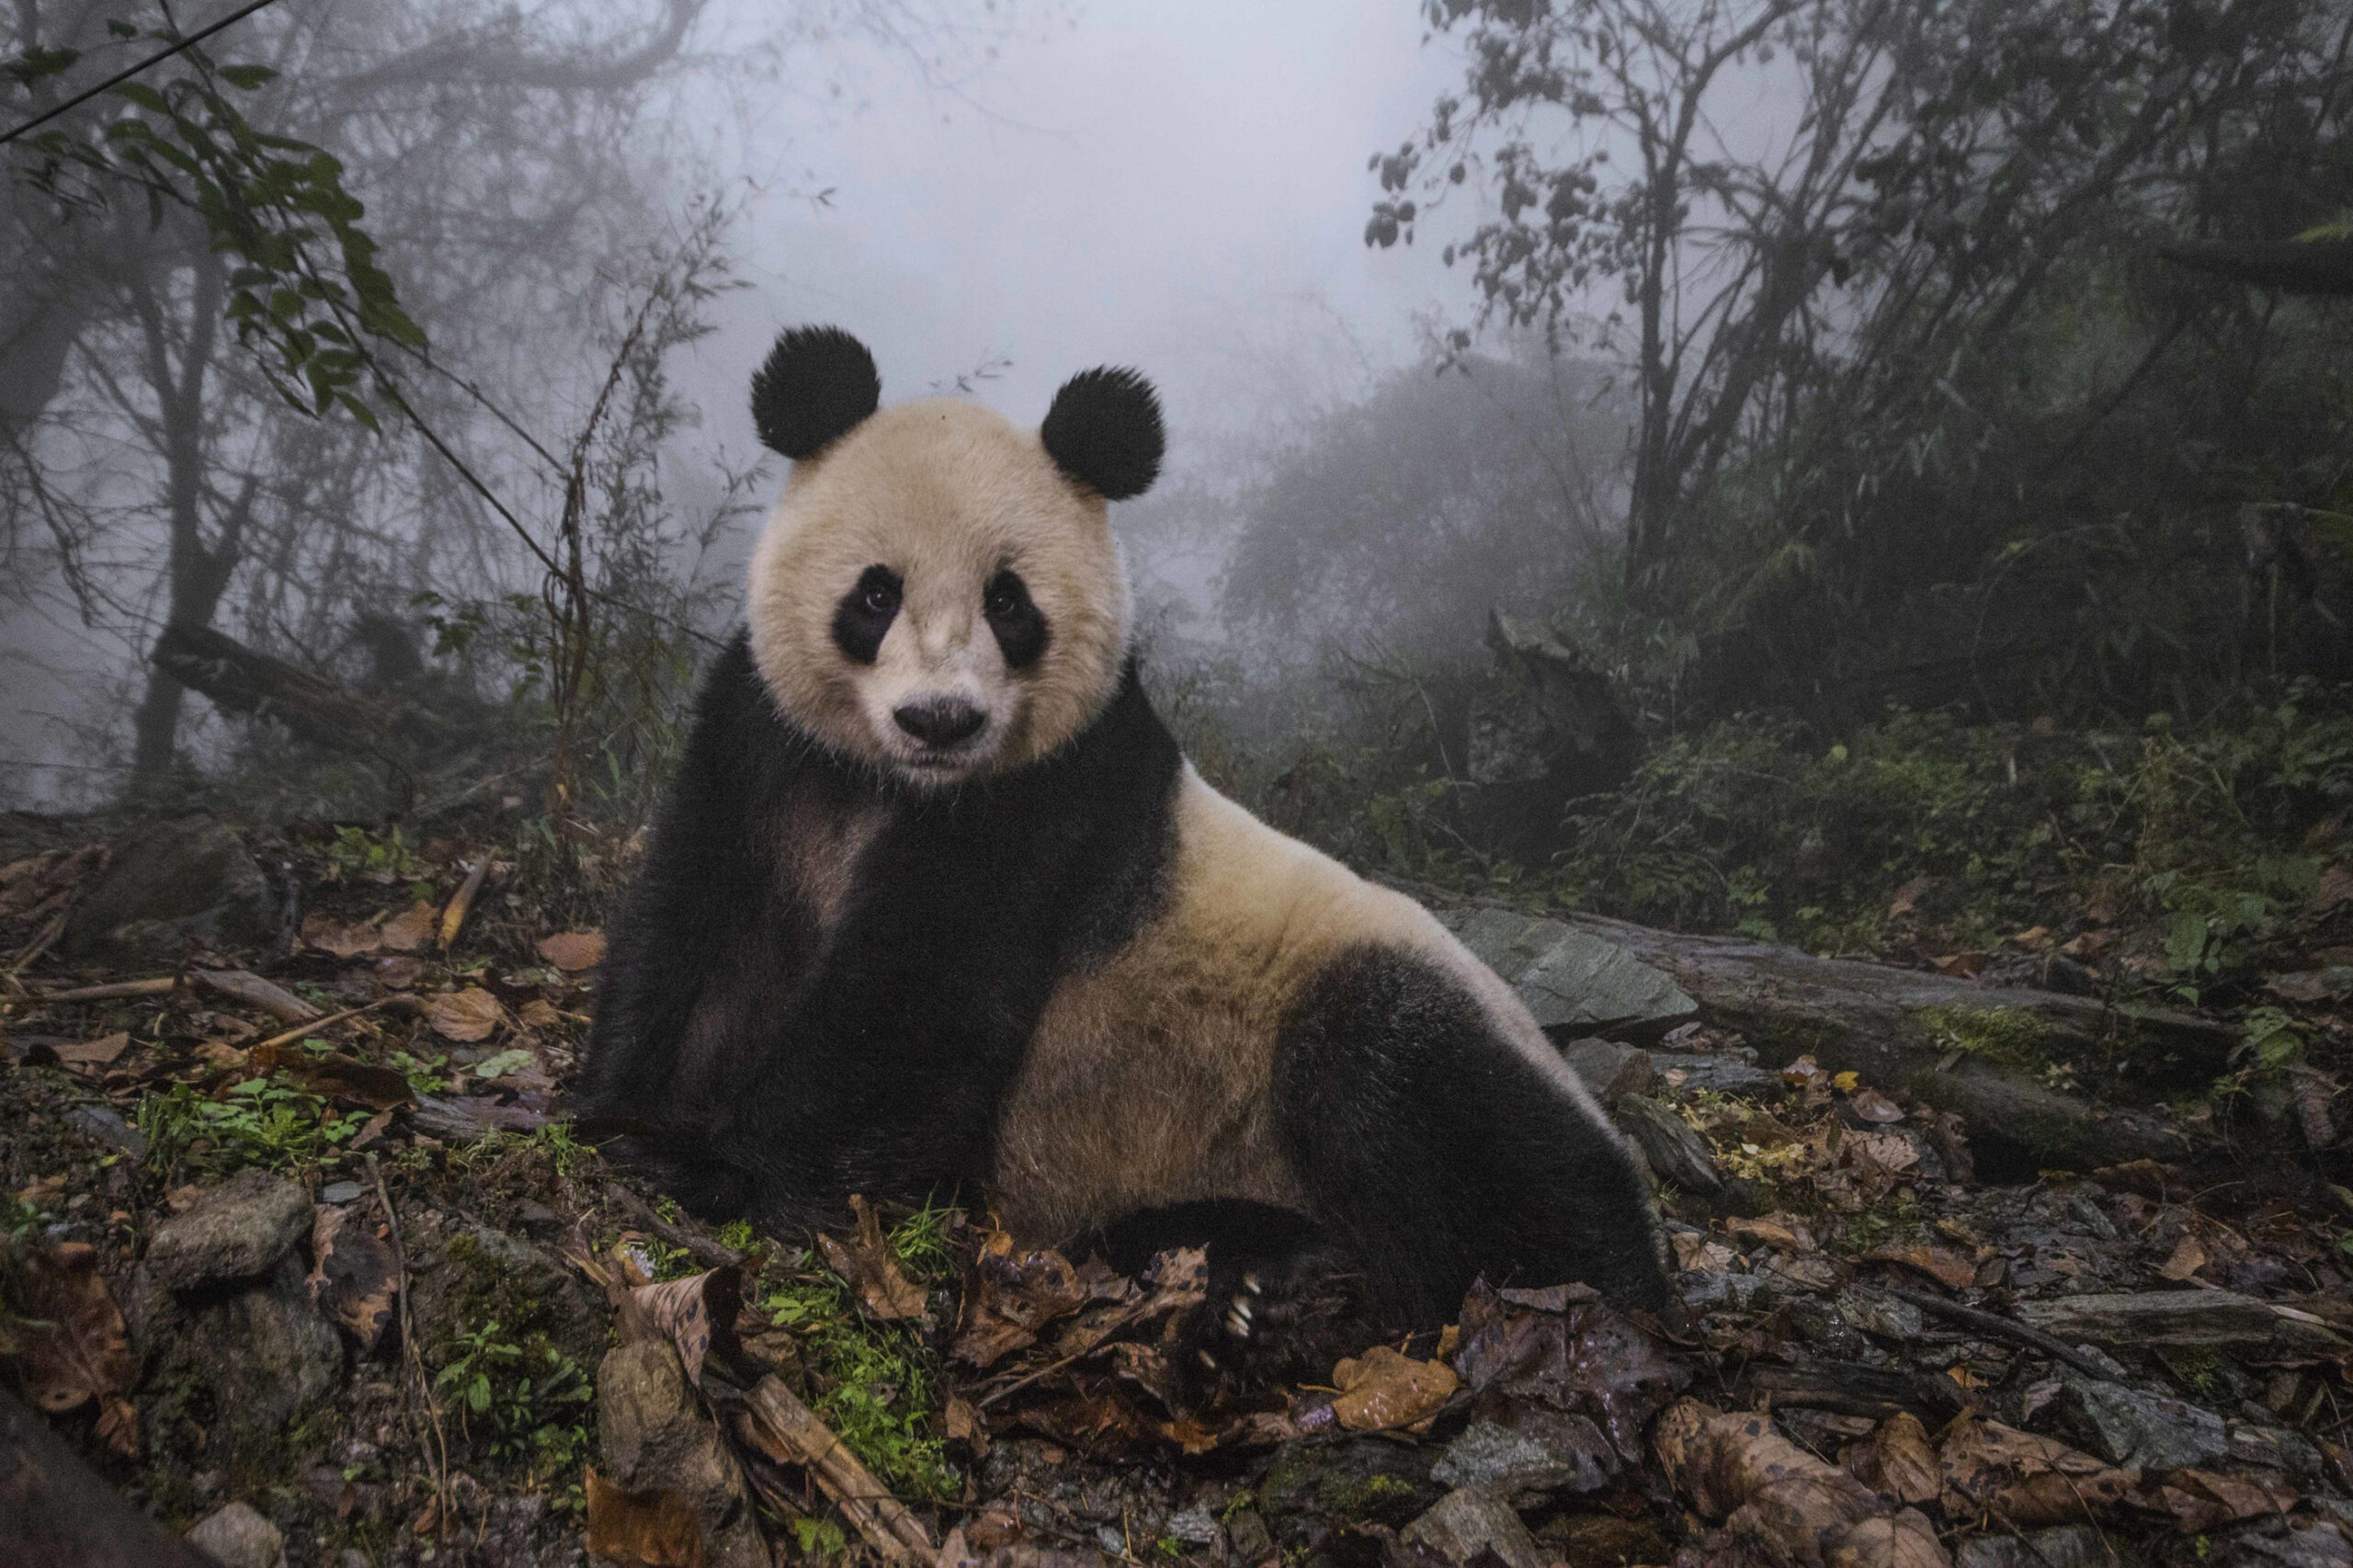 NatGeo’s 50 greatest images, and 5 other photo exhibits worth seeing right now